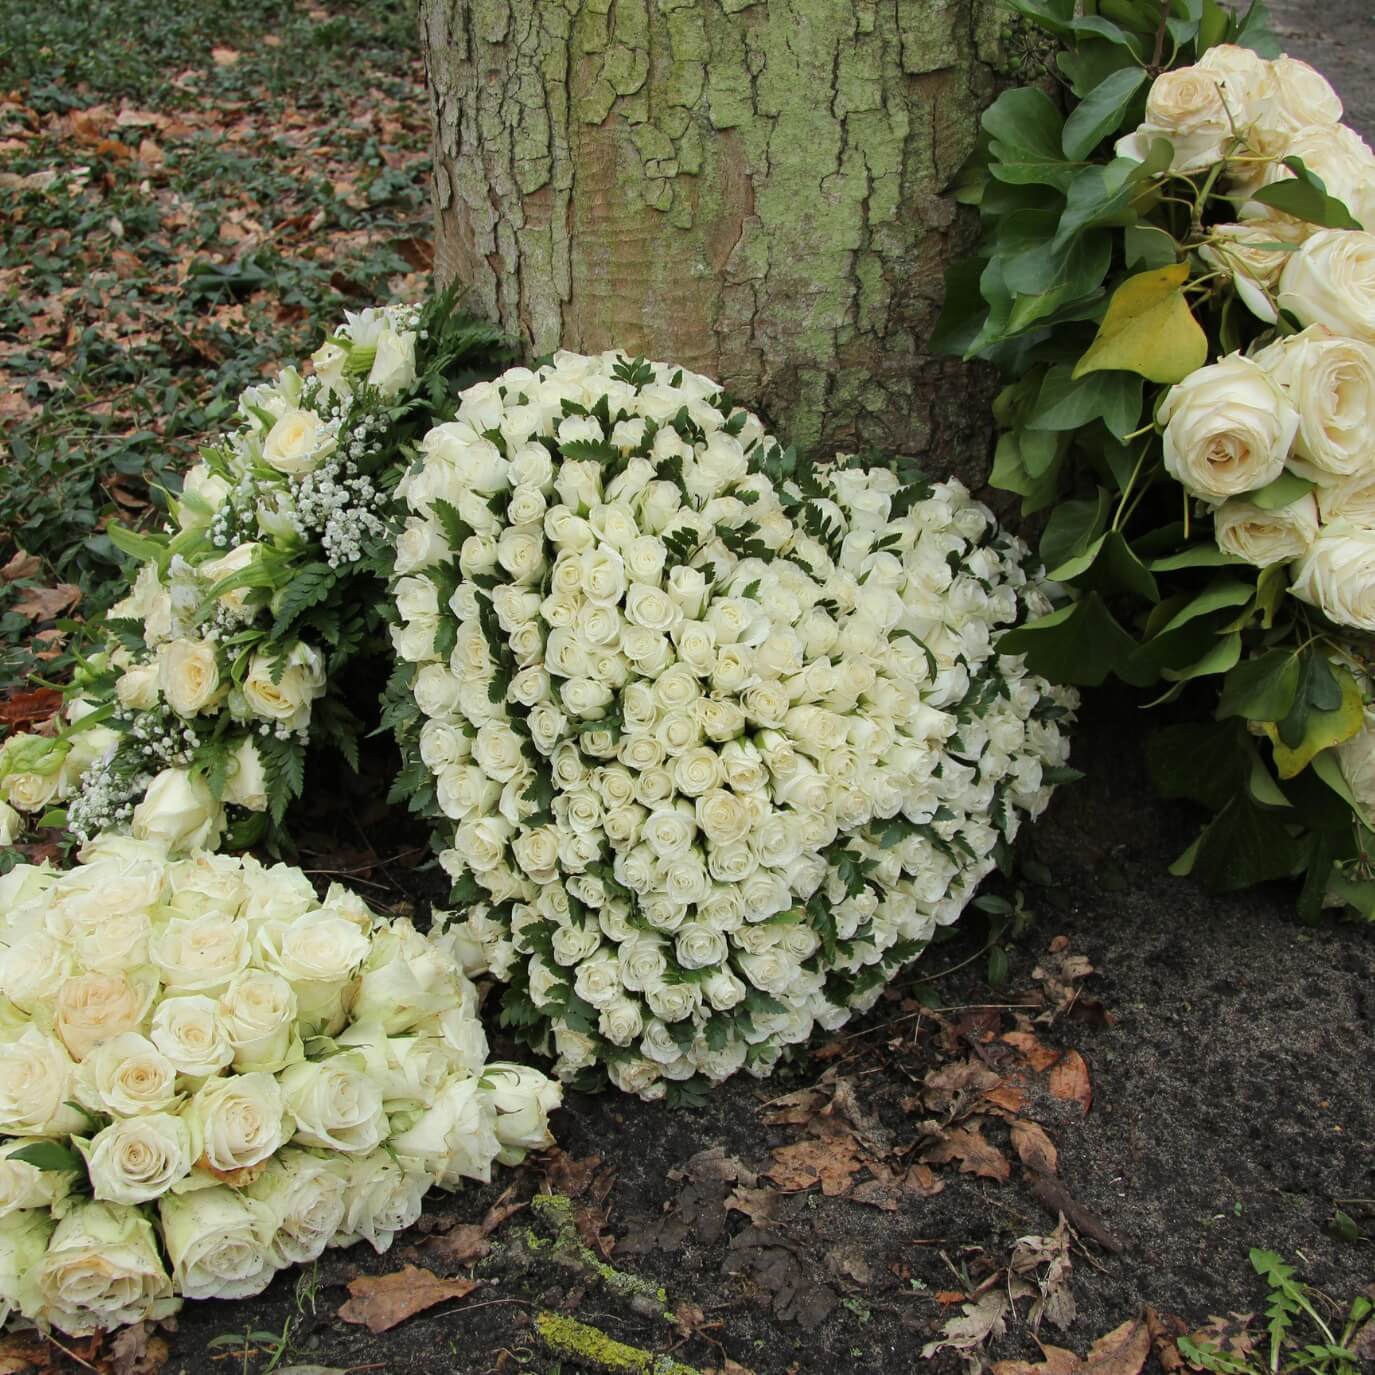 Planning Funeral Flowers: When and how to order by Vancouver florist Adele Rae